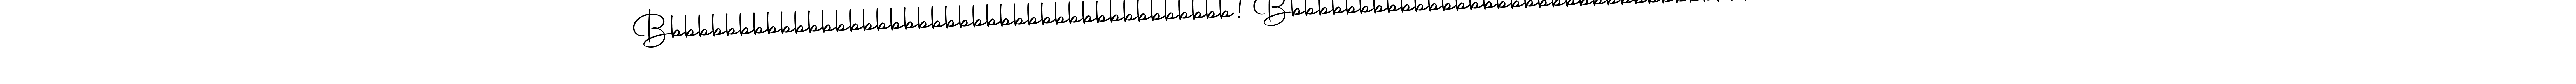 How to Draw Bbbbbbbbbbbbbbbbbbbbbbbbbbbbbbbbbbbbbbbbbb! Bbbbbbbbbbbbbbbbbbbbbbbbbbbbbbbbbbbbbbbbbbbbbbbb signature style? Autography-DOLnW is a latest design signature styles for name Bbbbbbbbbbbbbbbbbbbbbbbbbbbbbbbbbbbbbbbbbb! Bbbbbbbbbbbbbbbbbbbbbbbbbbbbbbbbbbbbbbbbbbbbbbbb. Bbbbbbbbbbbbbbbbbbbbbbbbbbbbbbbbbbbbbbbbbb! Bbbbbbbbbbbbbbbbbbbbbbbbbbbbbbbbbbbbbbbbbbbbbbbb signature style 10 images and pictures png